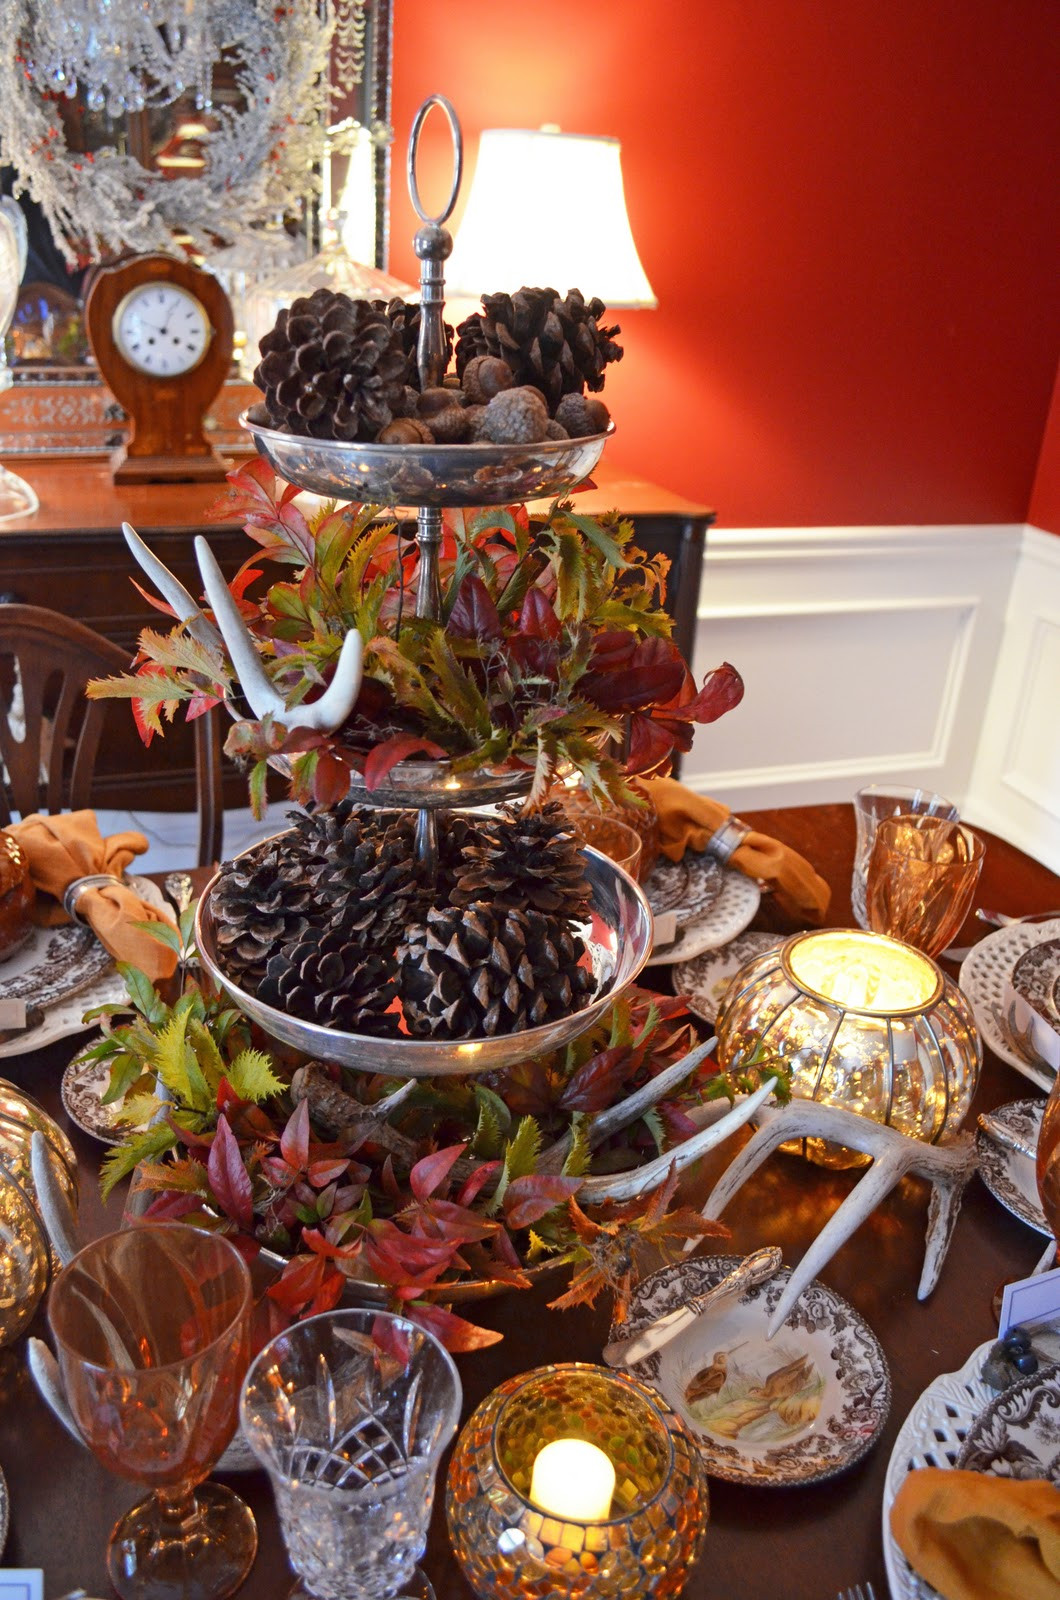 Thanksgiving Table Decorating Ideas
 Thanksgiving Table Setting with Nature Themed Centepiece